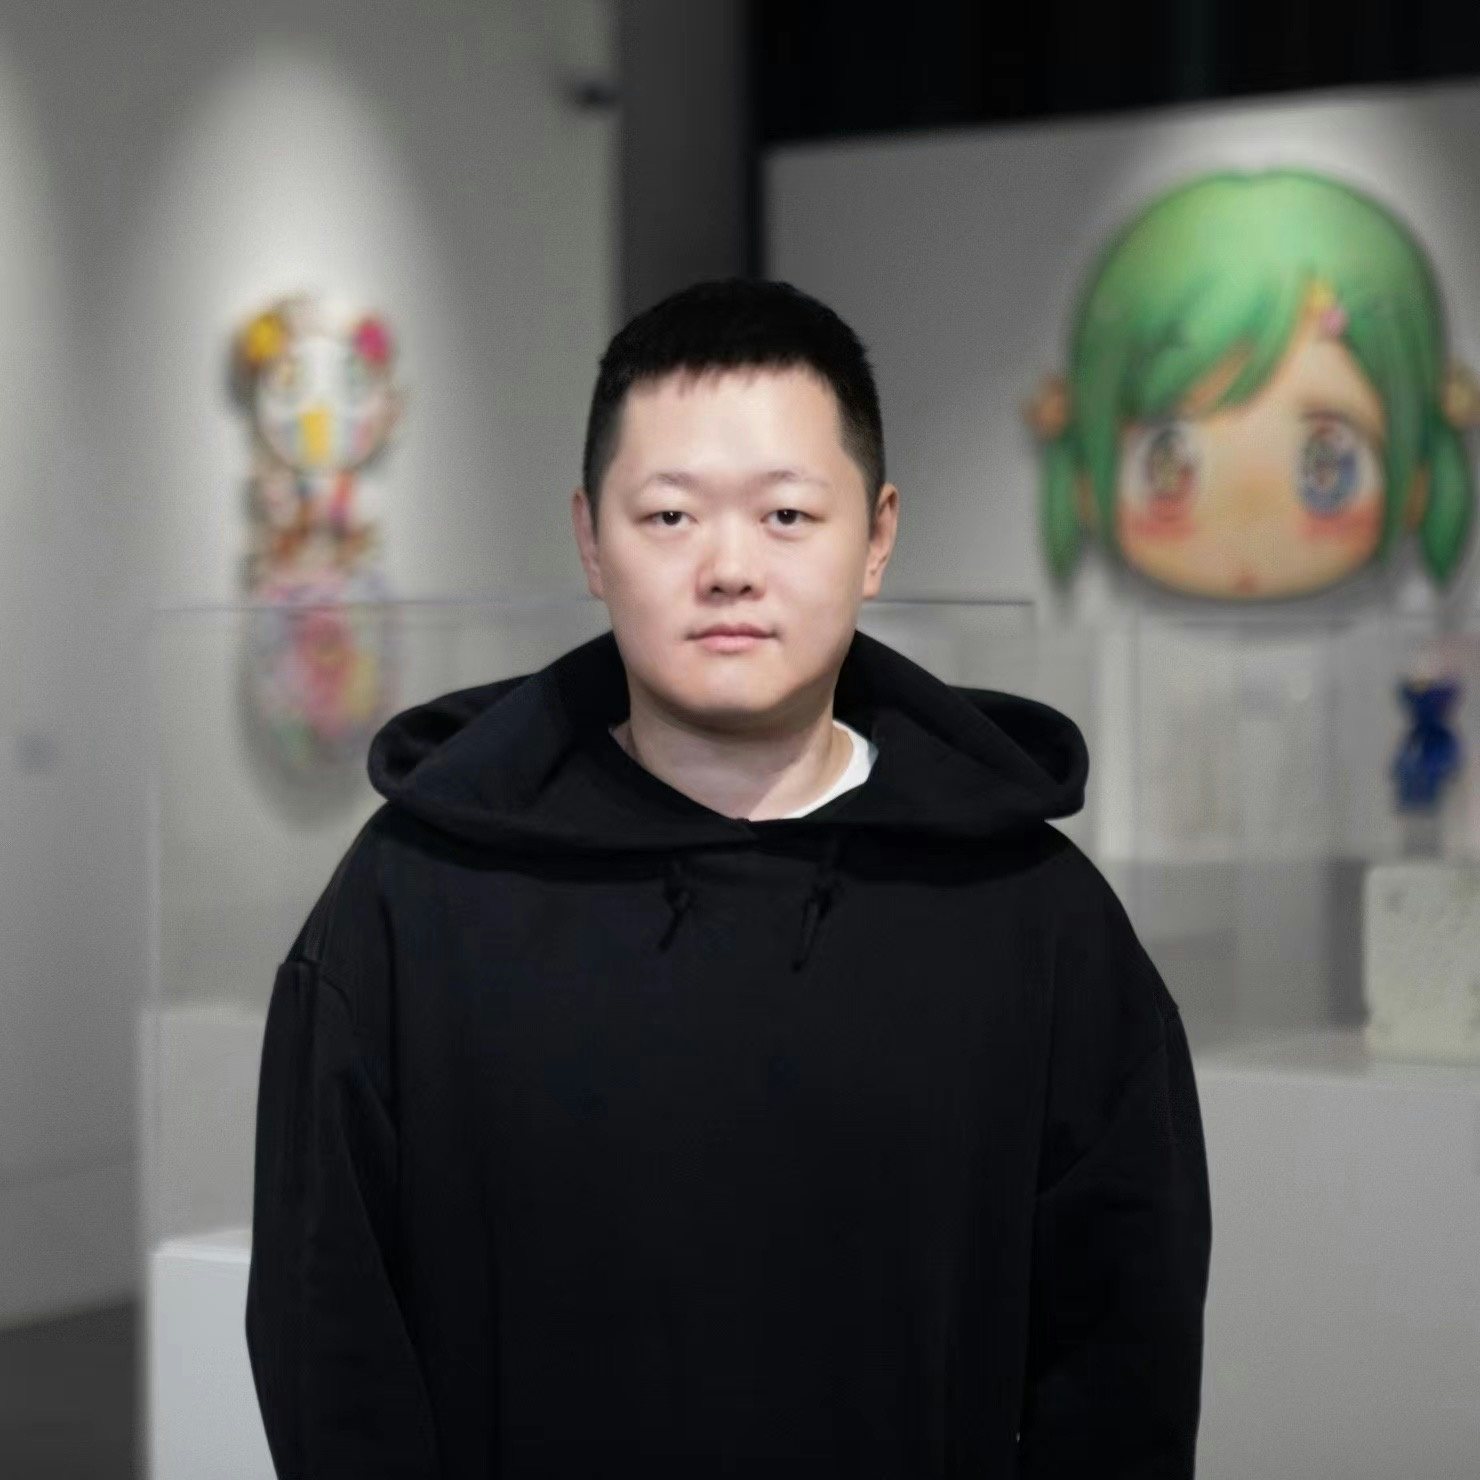 James Li is the founder of street fashion media group SIZE MEDIA and CHOCO1ATE Artspace in Beijing.